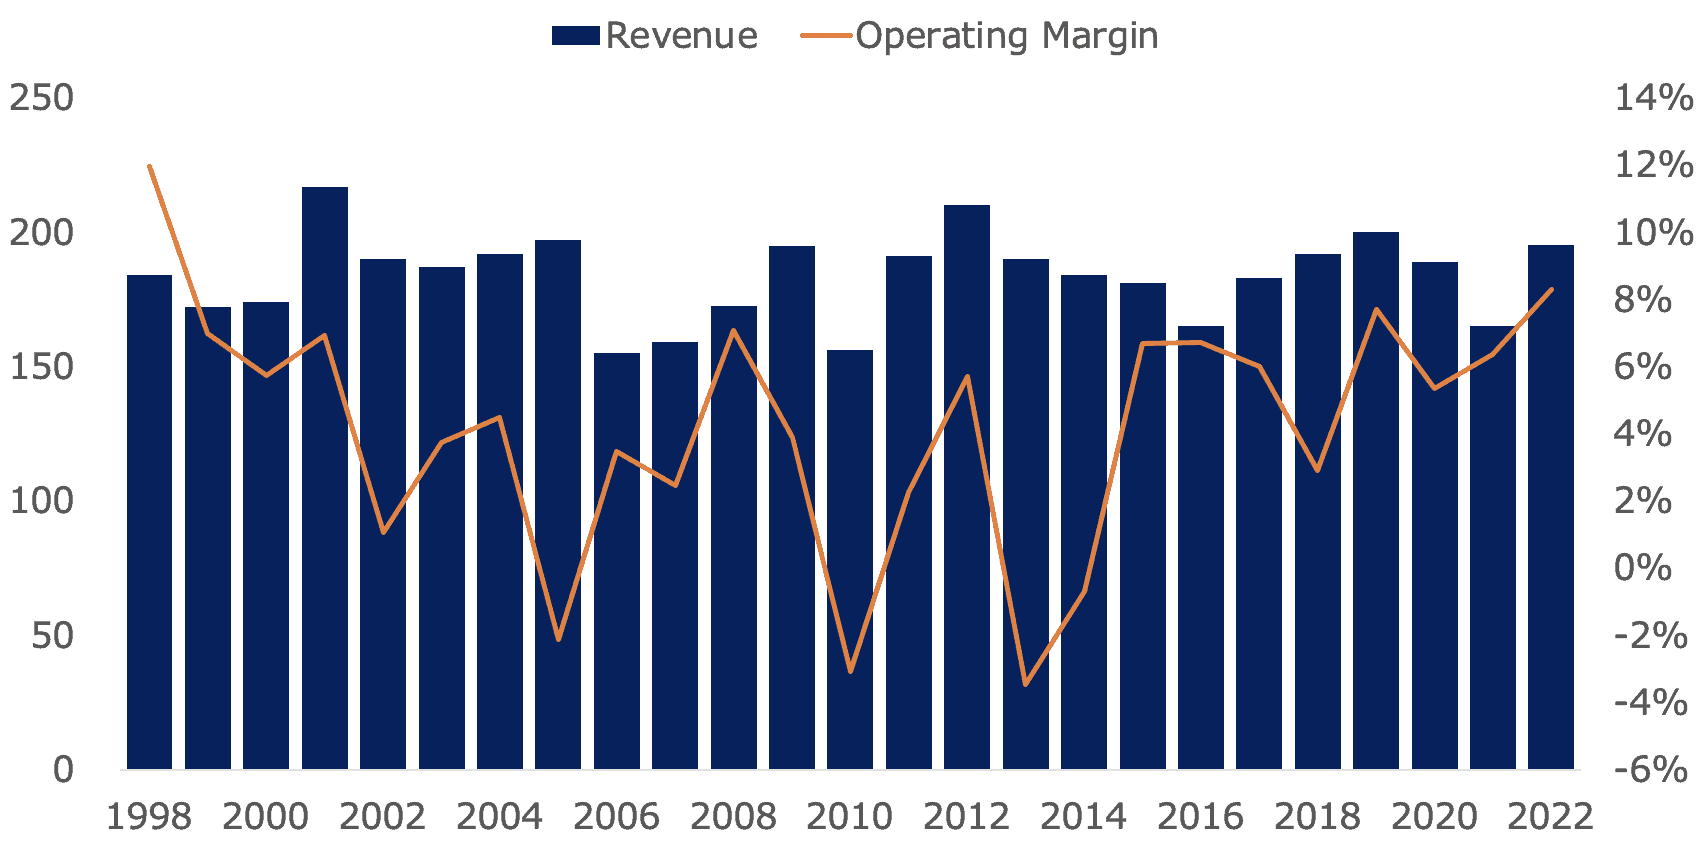 A bar chart showing Renold plc revenue has been mainly flat between 1998 and 2022, with an overlaid line chart of operating margin showing it to be volatile, and negative at points between 2004 and 2014, but demonstrating a rise after this point.